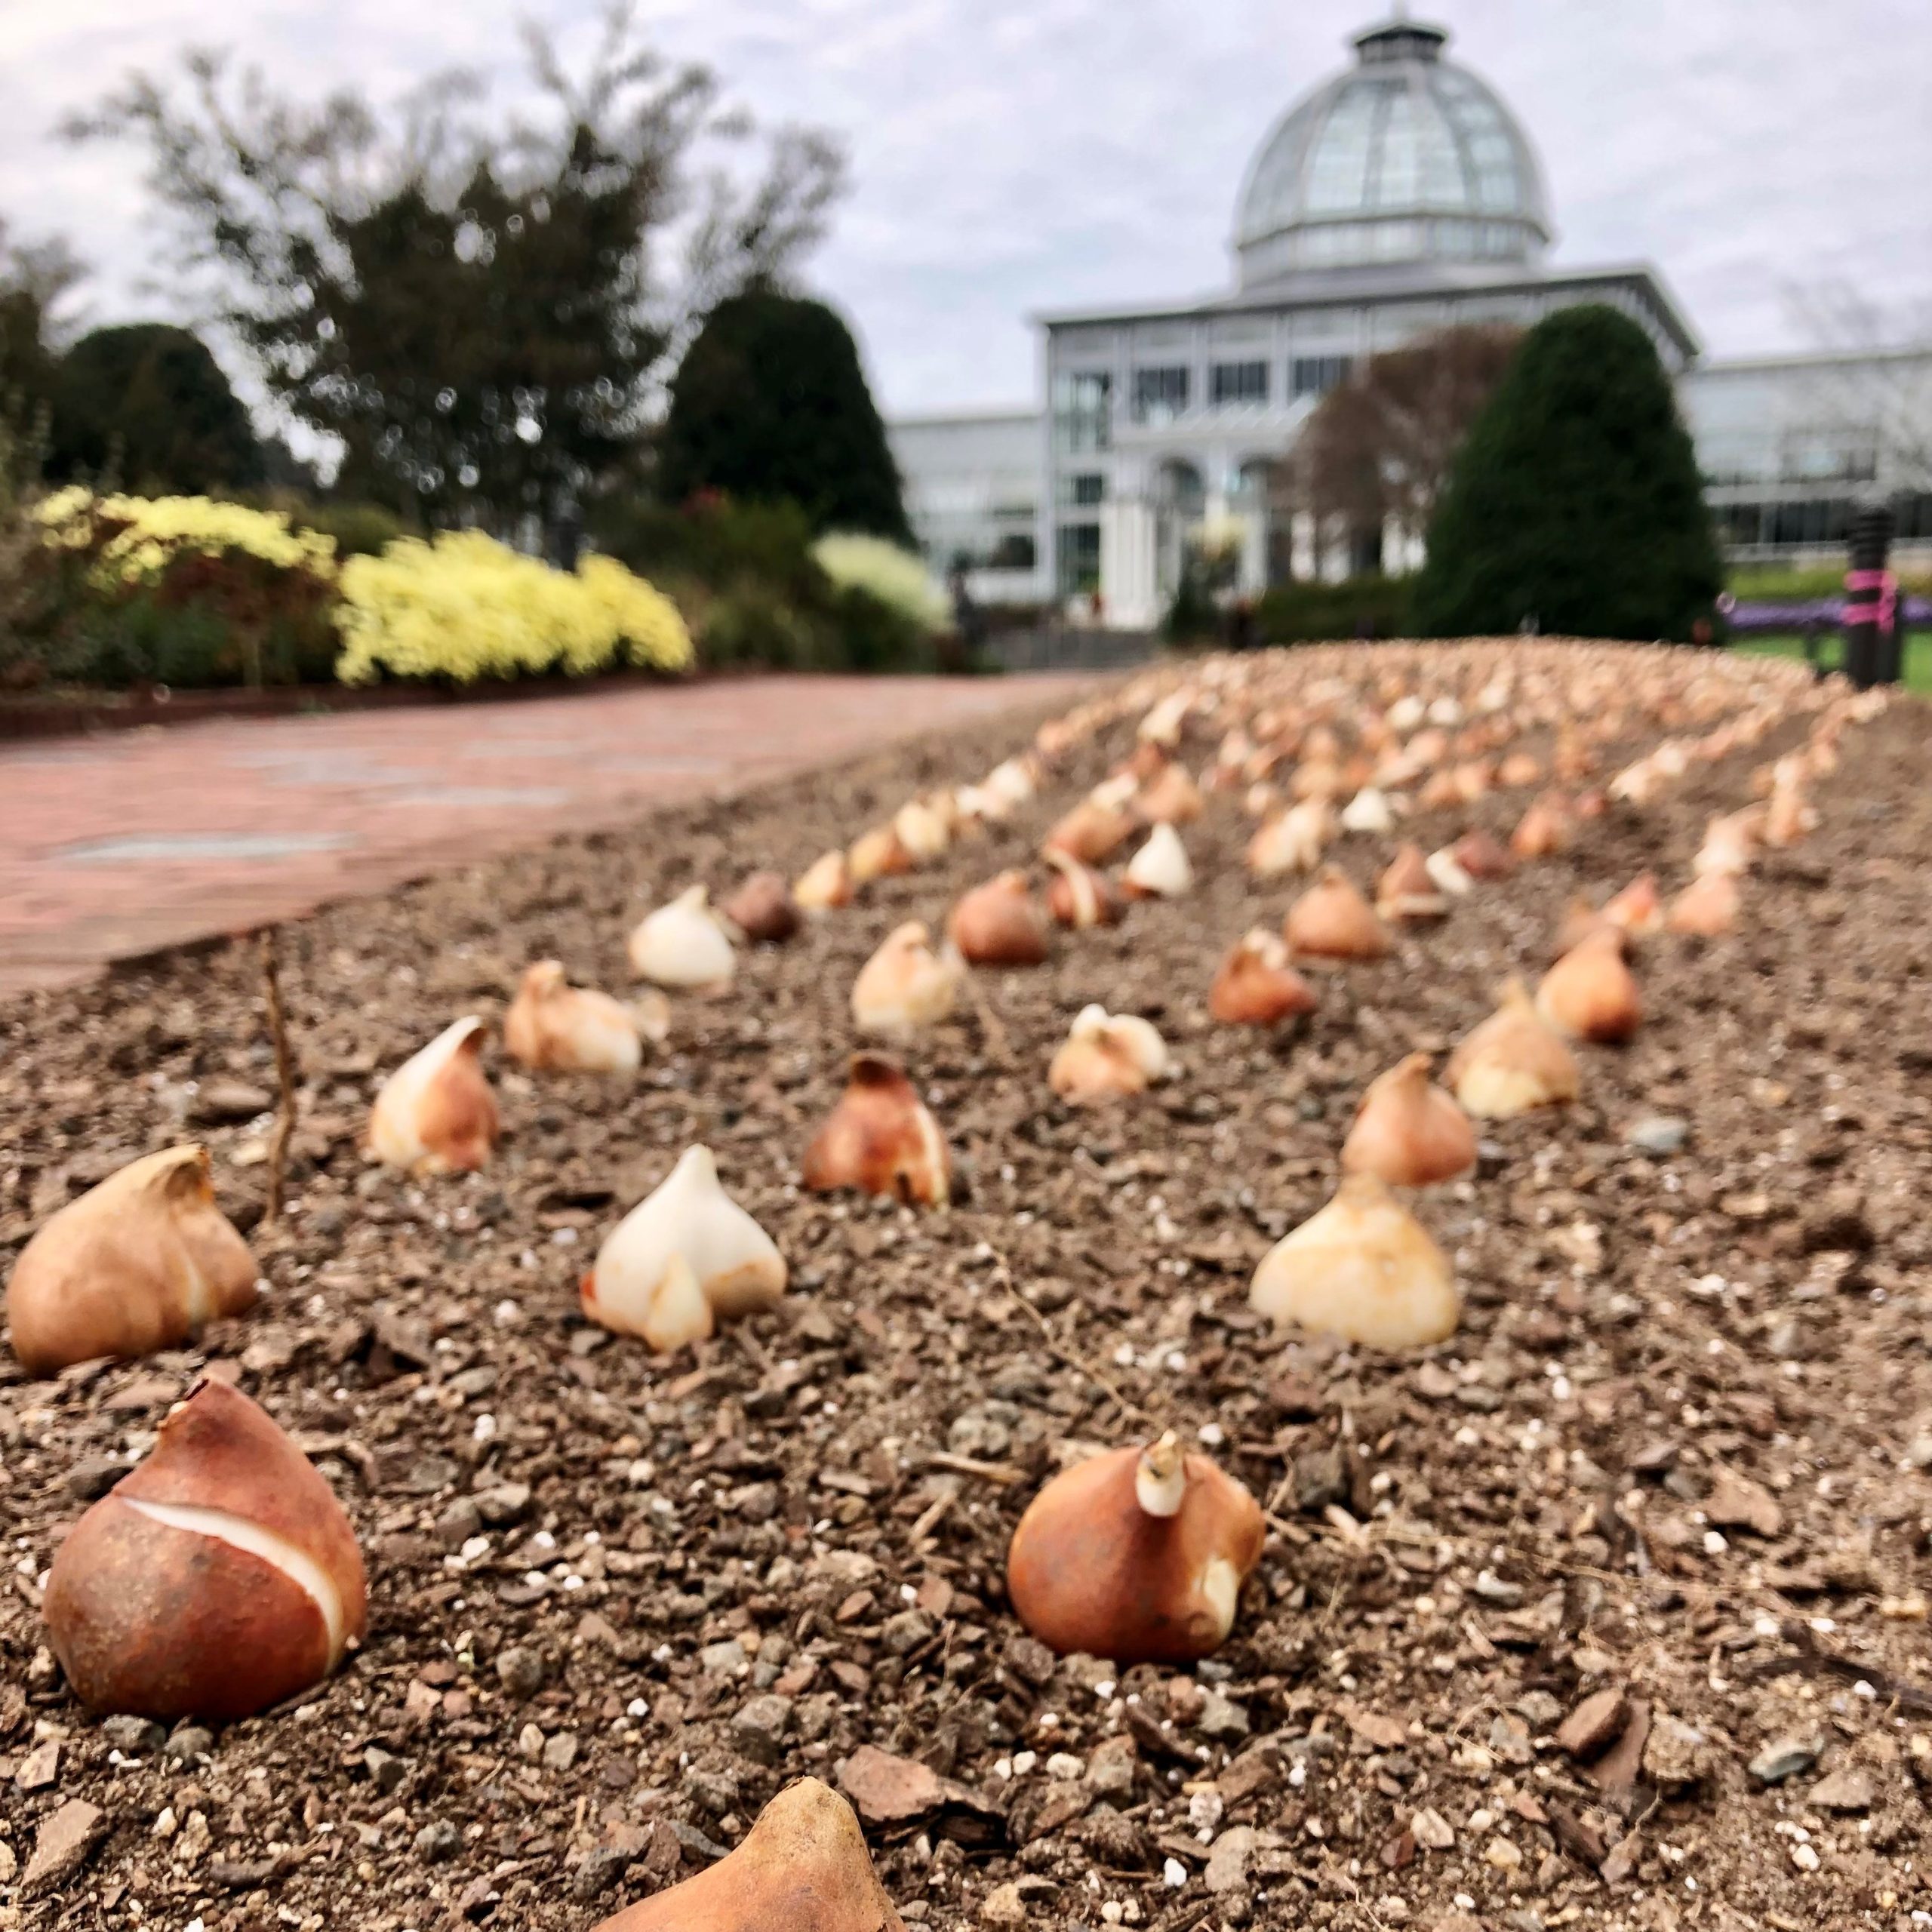 Looking back at 2021 we remember all the bulbs planted for spring 2022